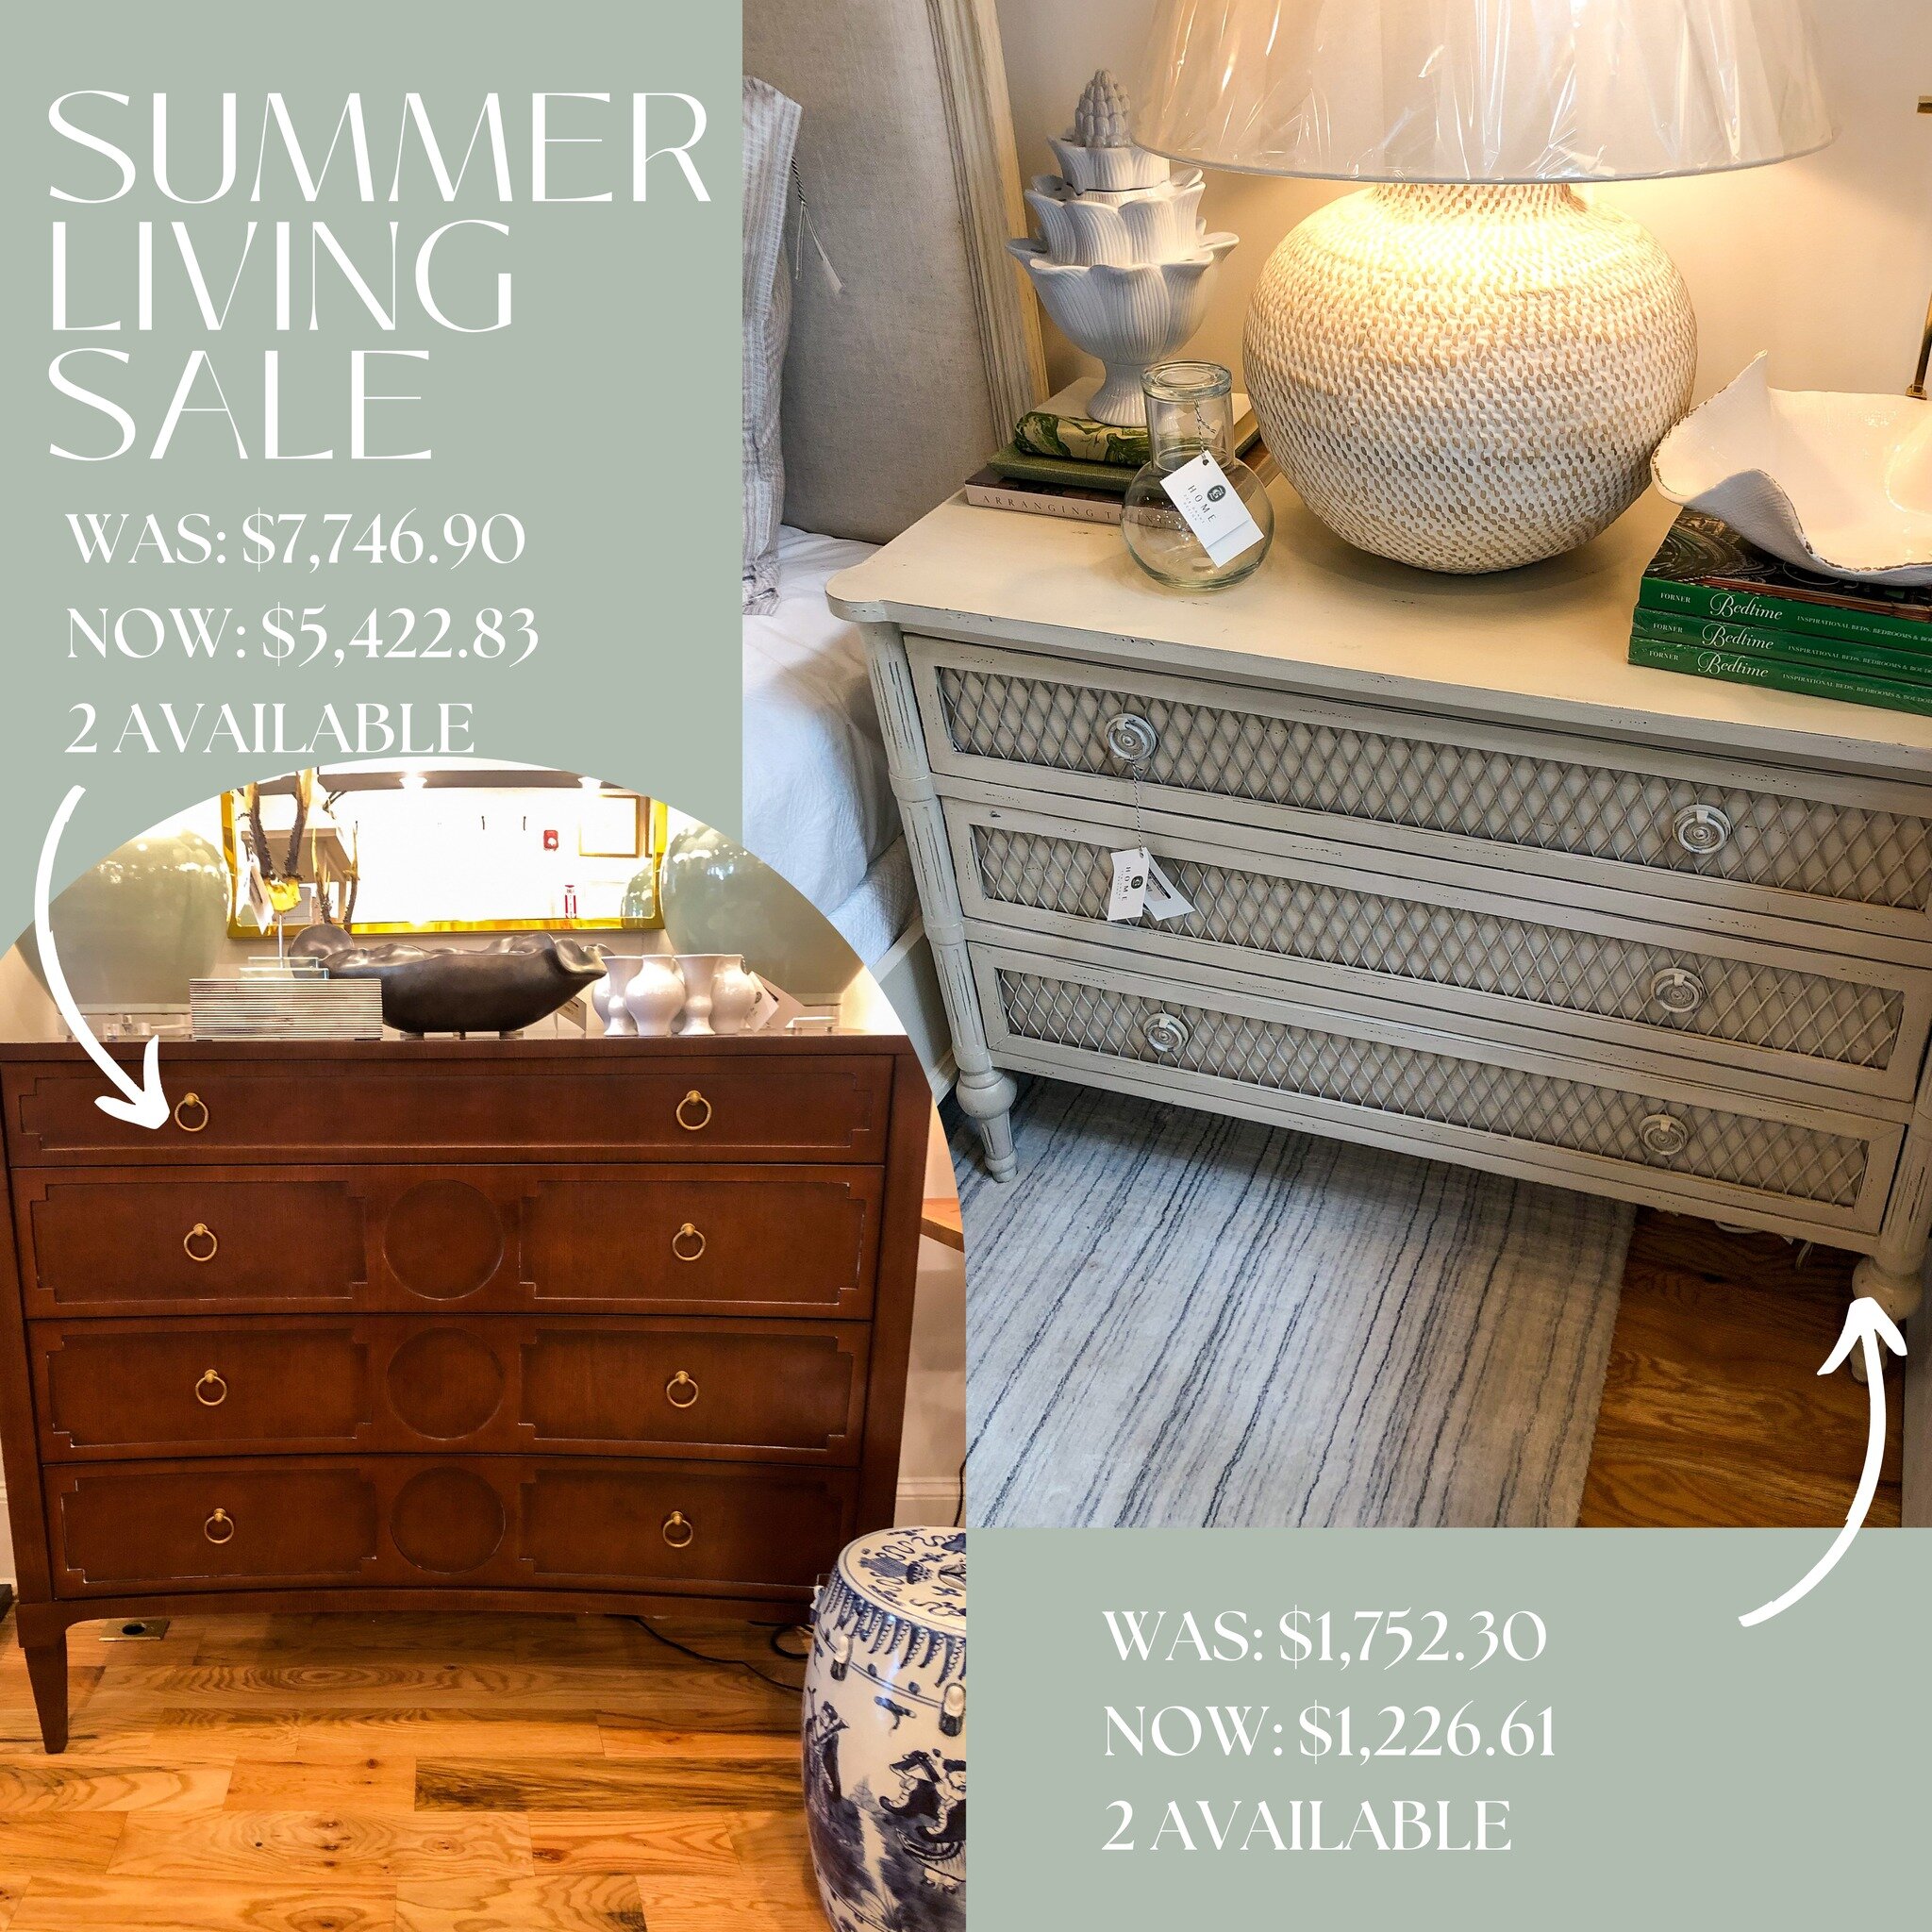 Whether you're looking for a wood stain or white wash, we have two sets of long chests that would make great bedside tables. If you have any questions or would like more information, please direct message us or give us a call at 706-453-0588.